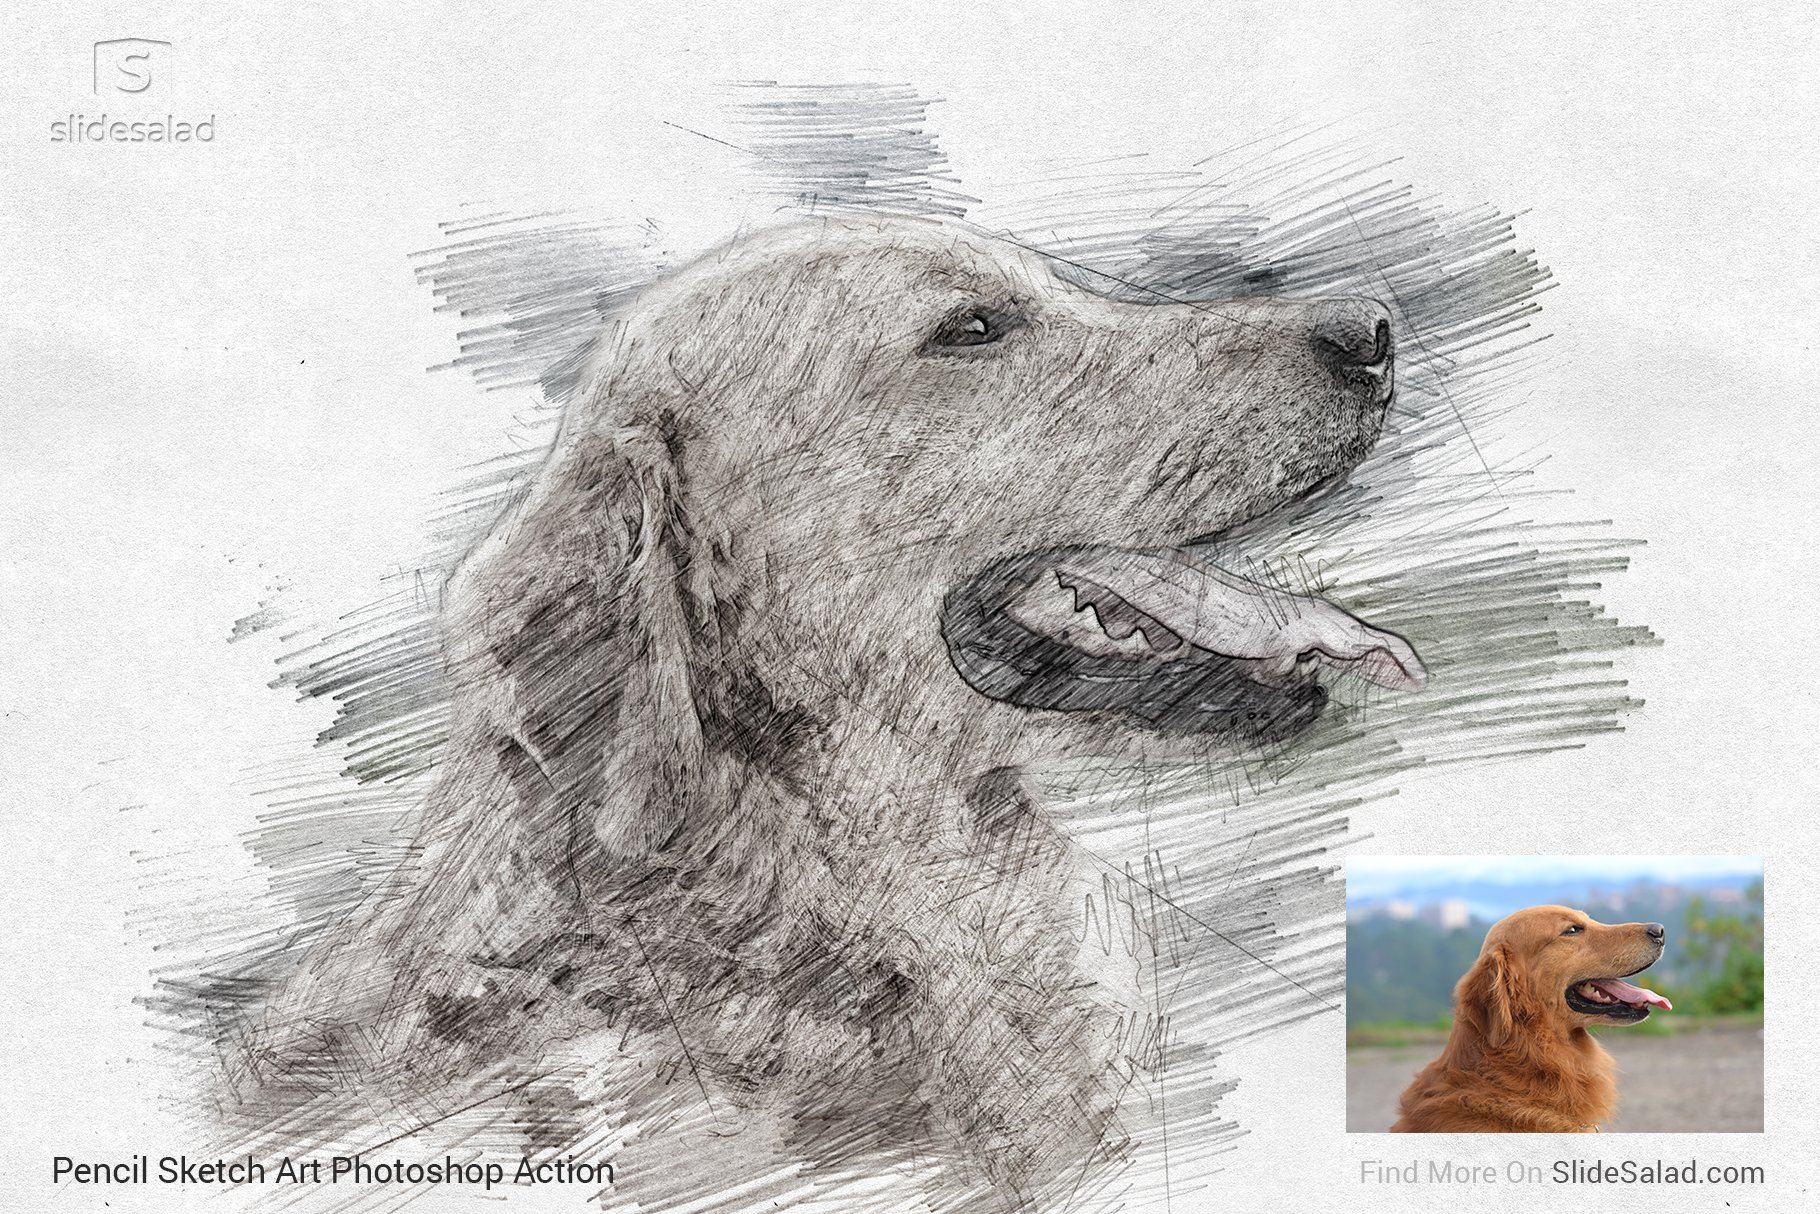 Pencil Sketch Art Photoshop Action - dog drawing with photo.